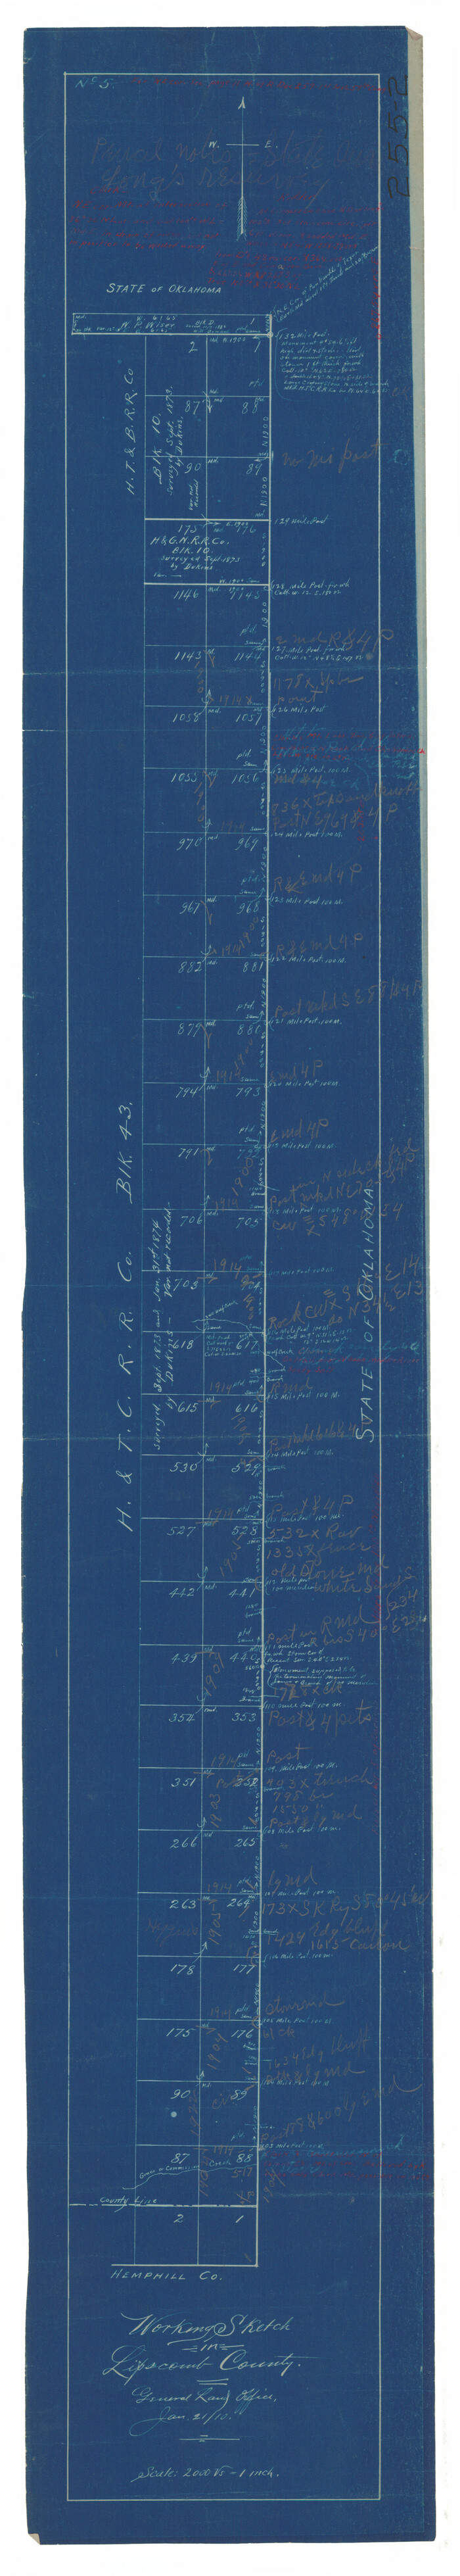 92083, Working Sketch in Lipscomb County [showing East line of County along border with Oklahoma], Twichell Survey Records